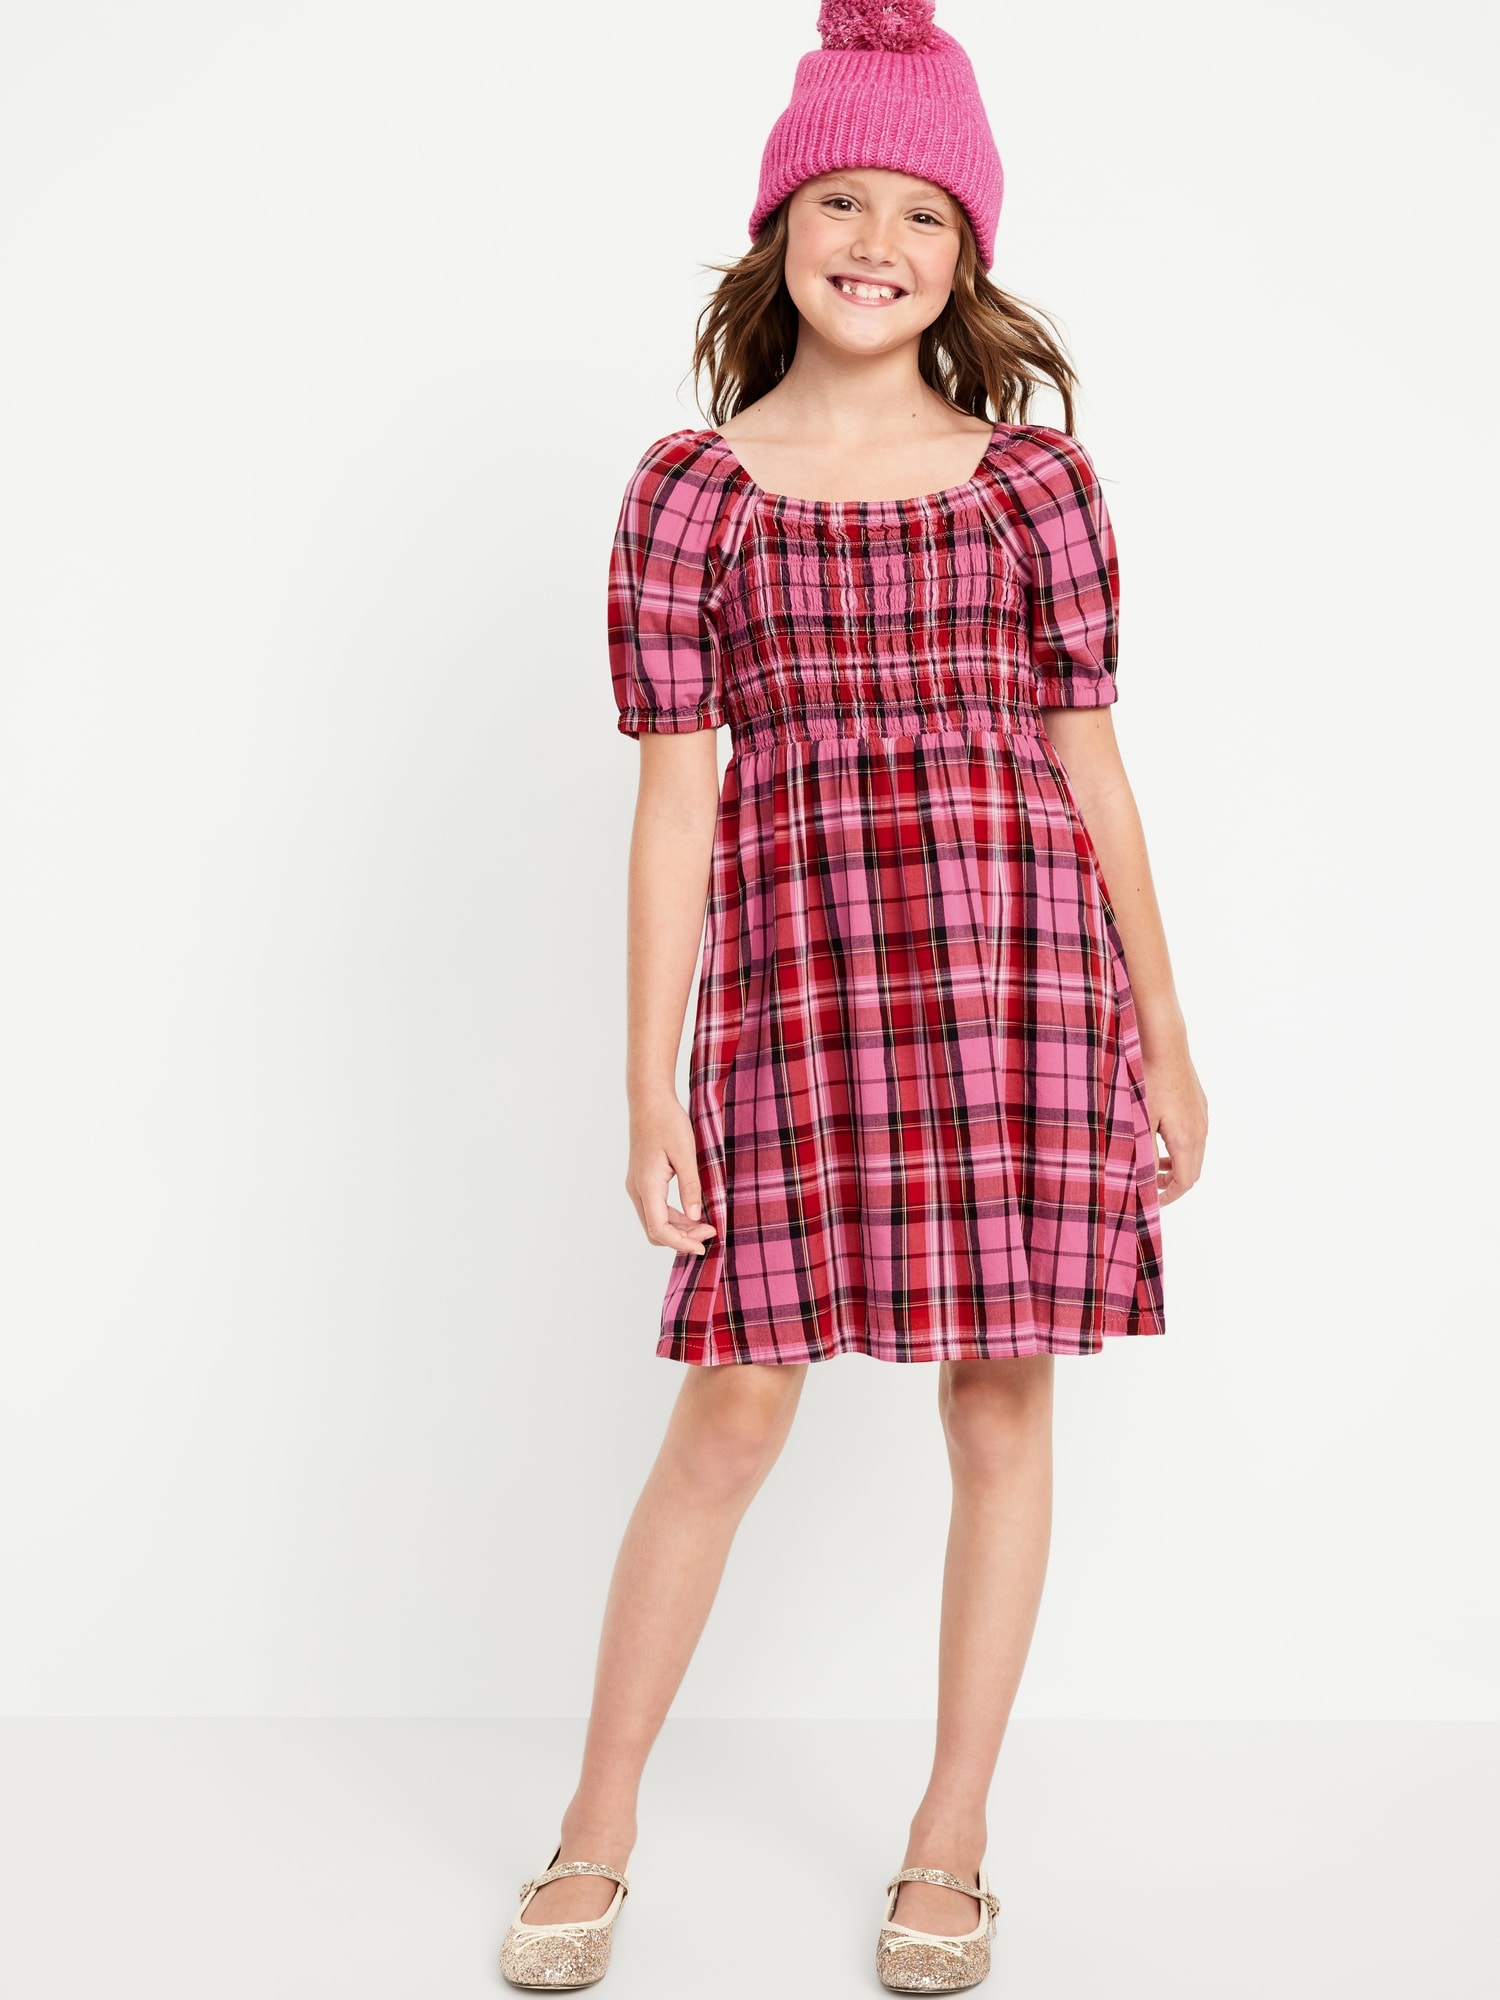 Puff-Sleeve Smocked Dress for Girls